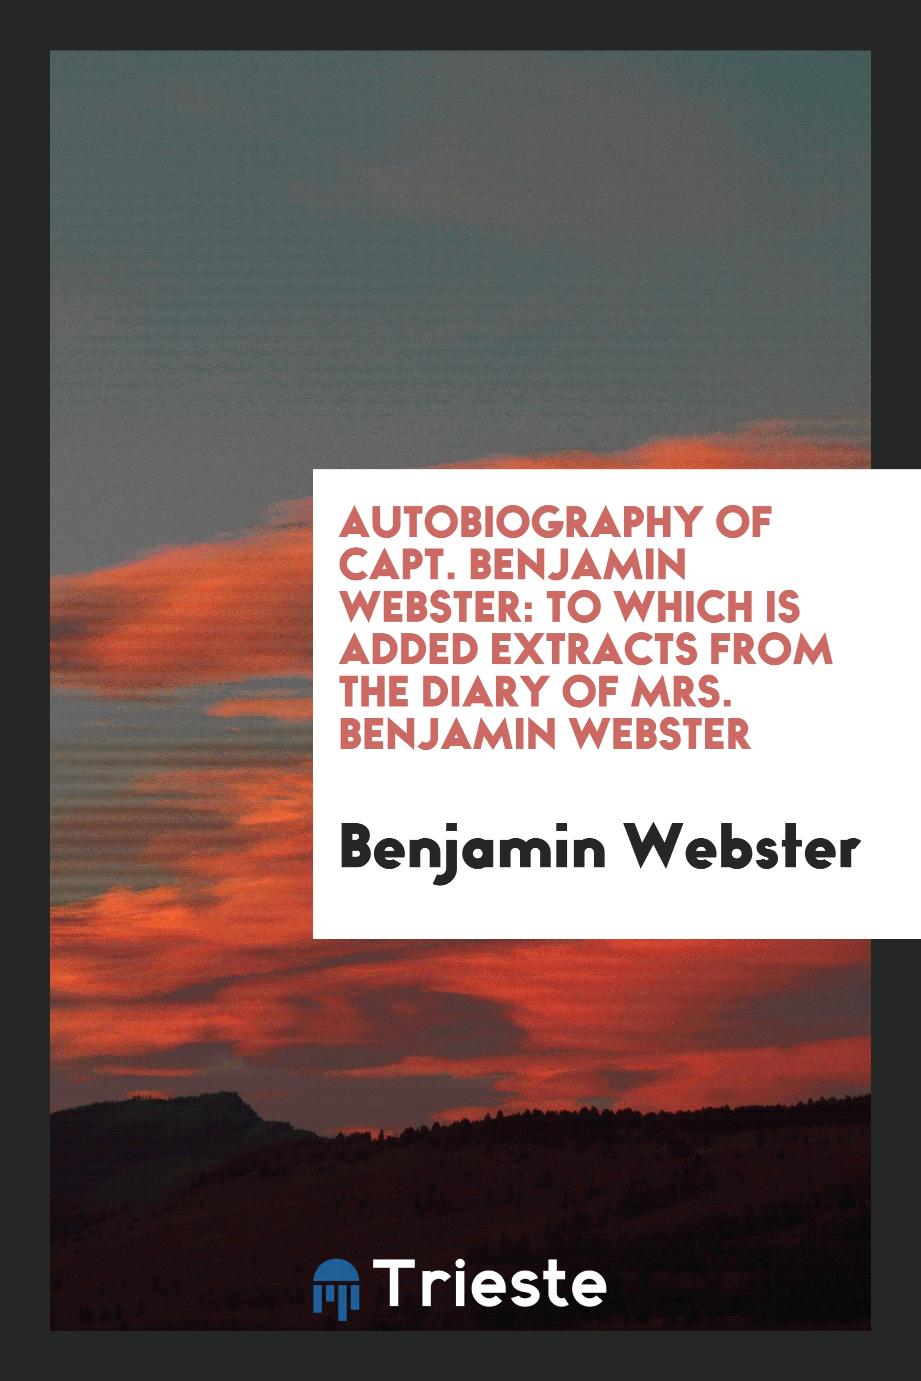 Autobiography of Capt. Benjamin Webster: to which is added extracts from the diary of Mrs. Benjamin Webster